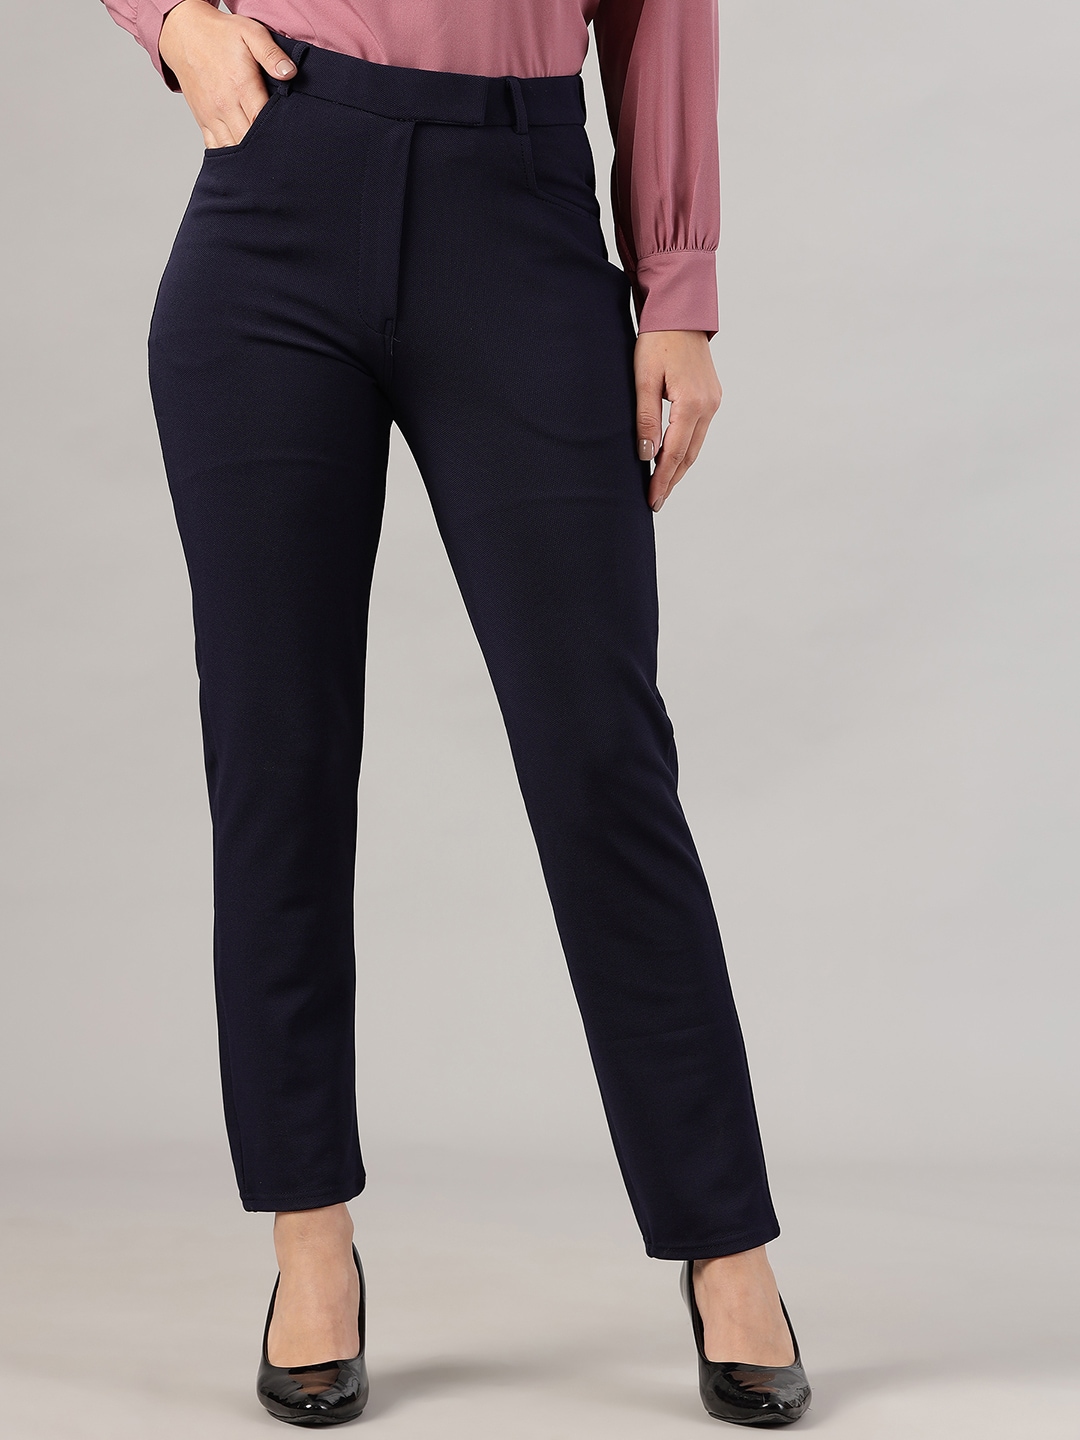 FITHUB Women Wrinkle Free Mid Rise Cotton Formal Trousers Price in India